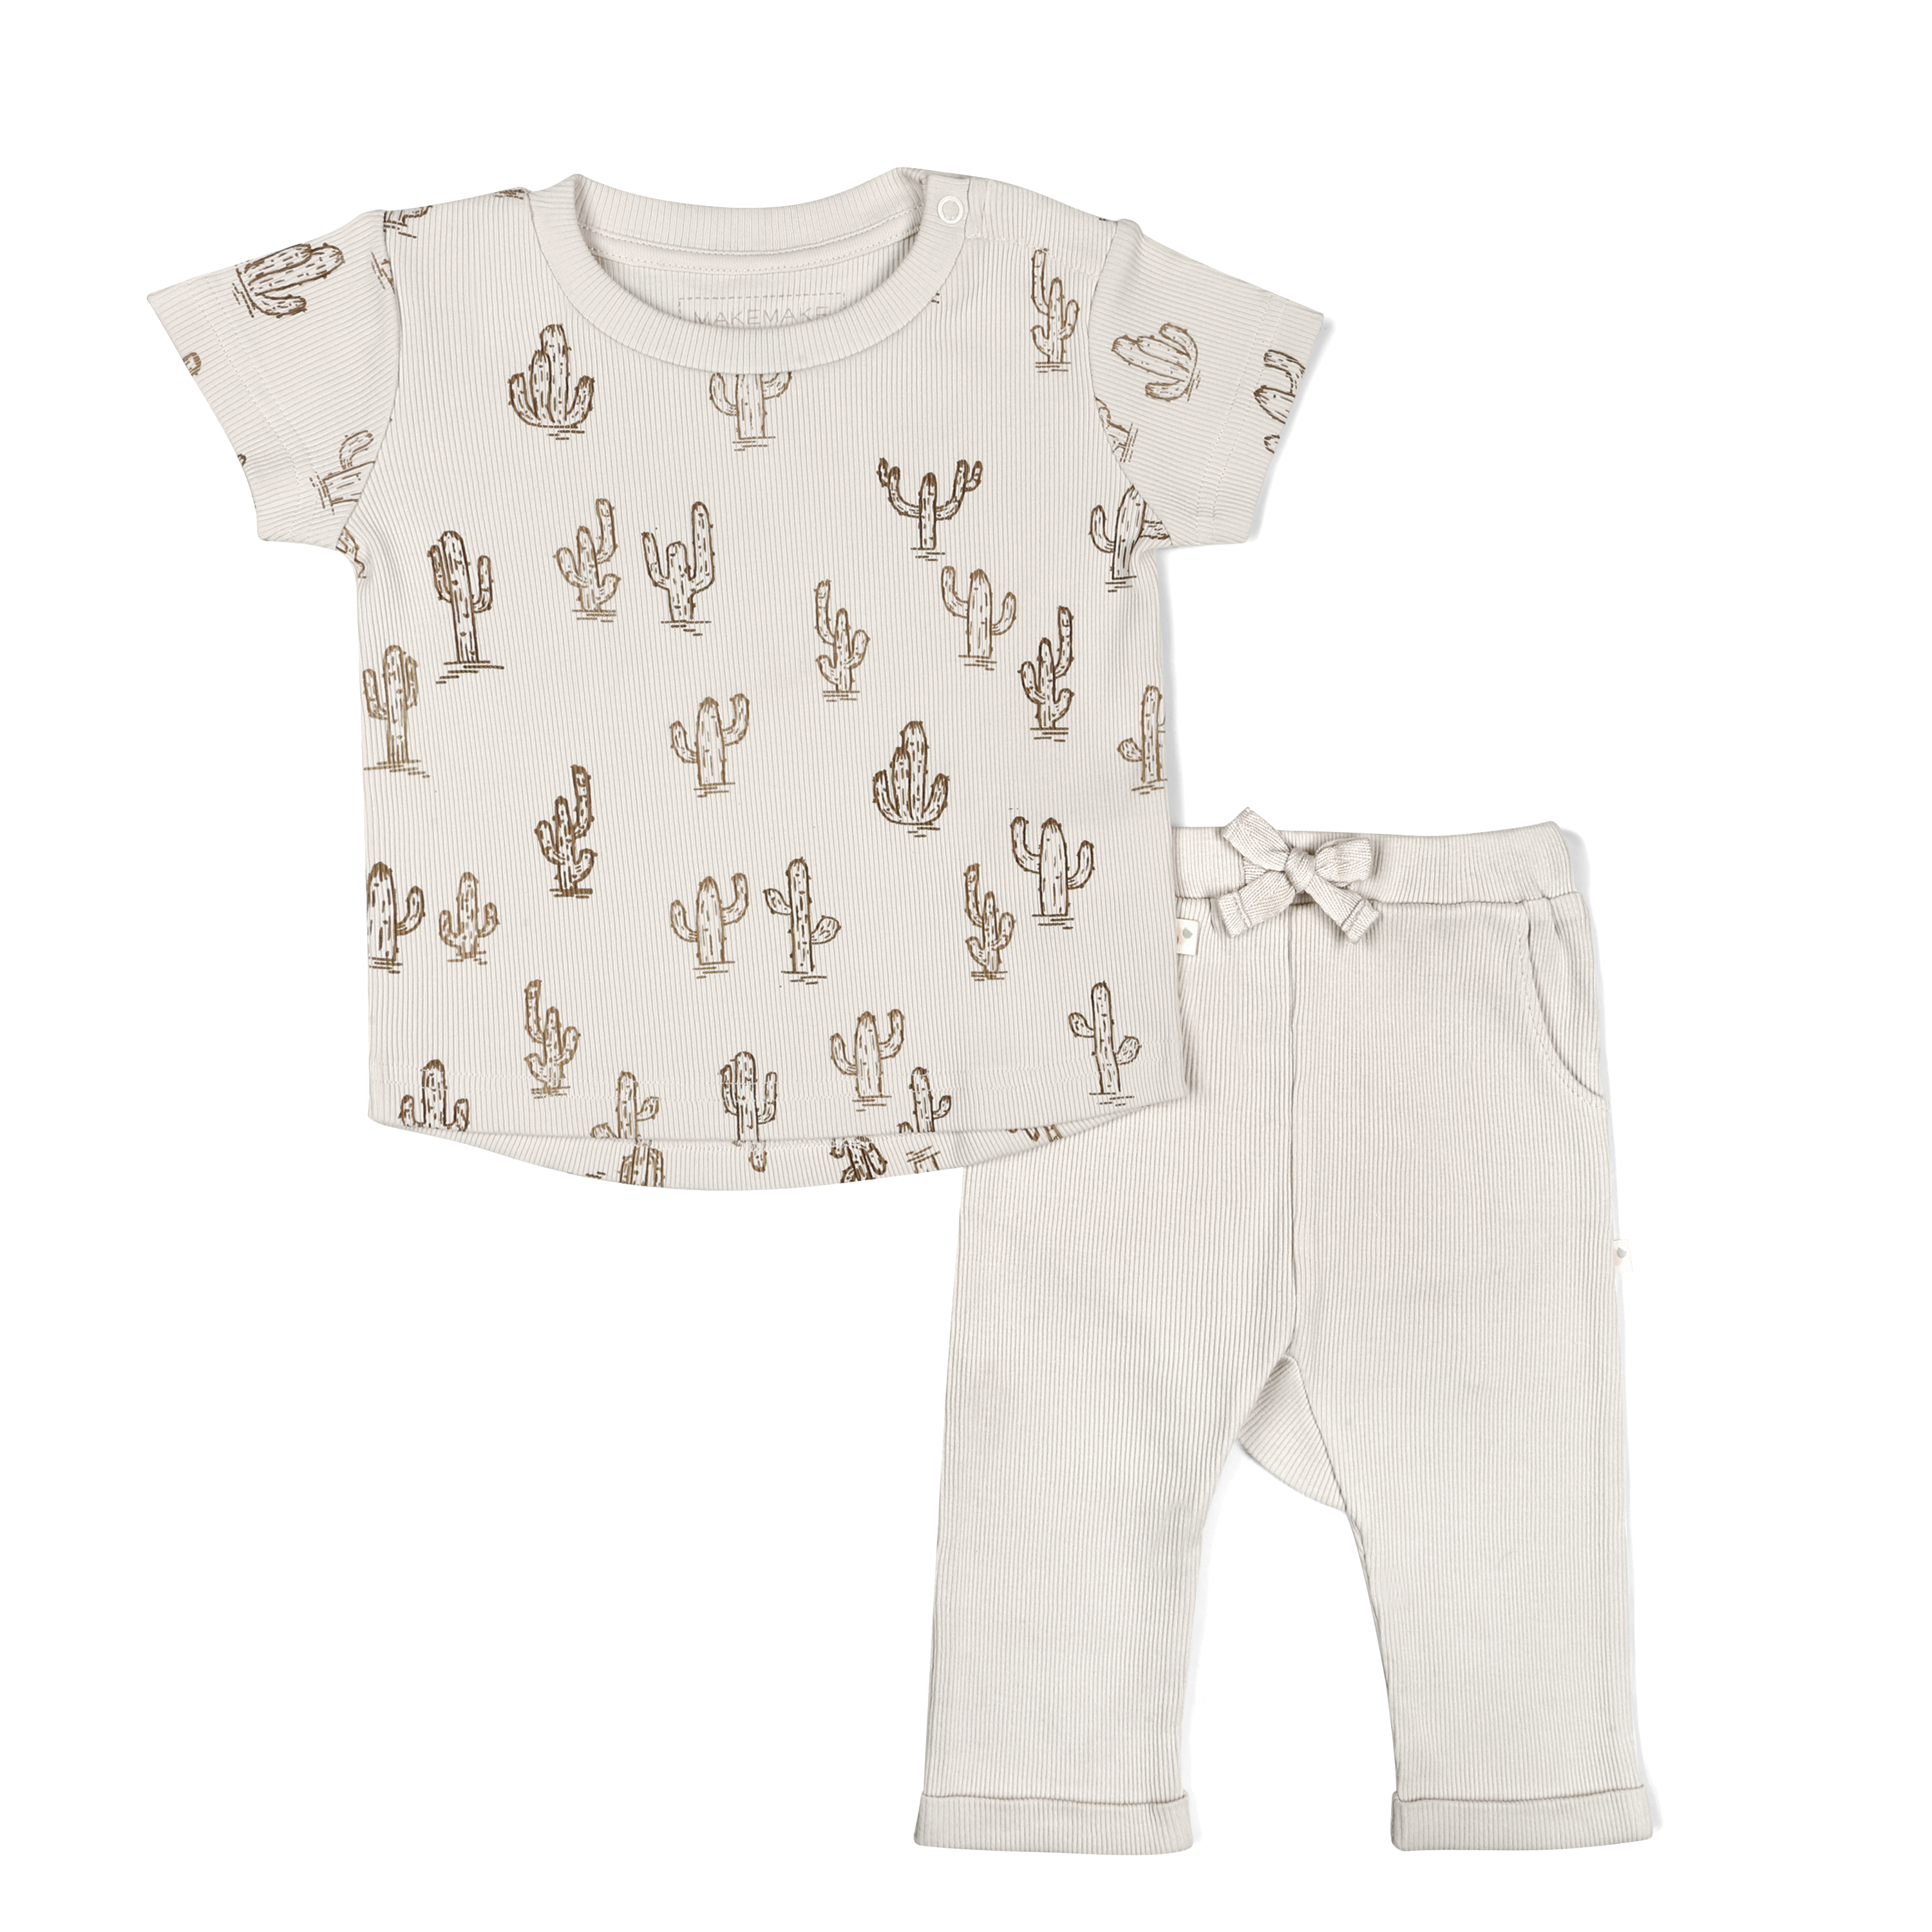 A Makemake Organics baby outfit consisting of a beige short-sleeved shirt with a cactus print and coordinating beige leggings with a bow at the waist, displayed against a white background.